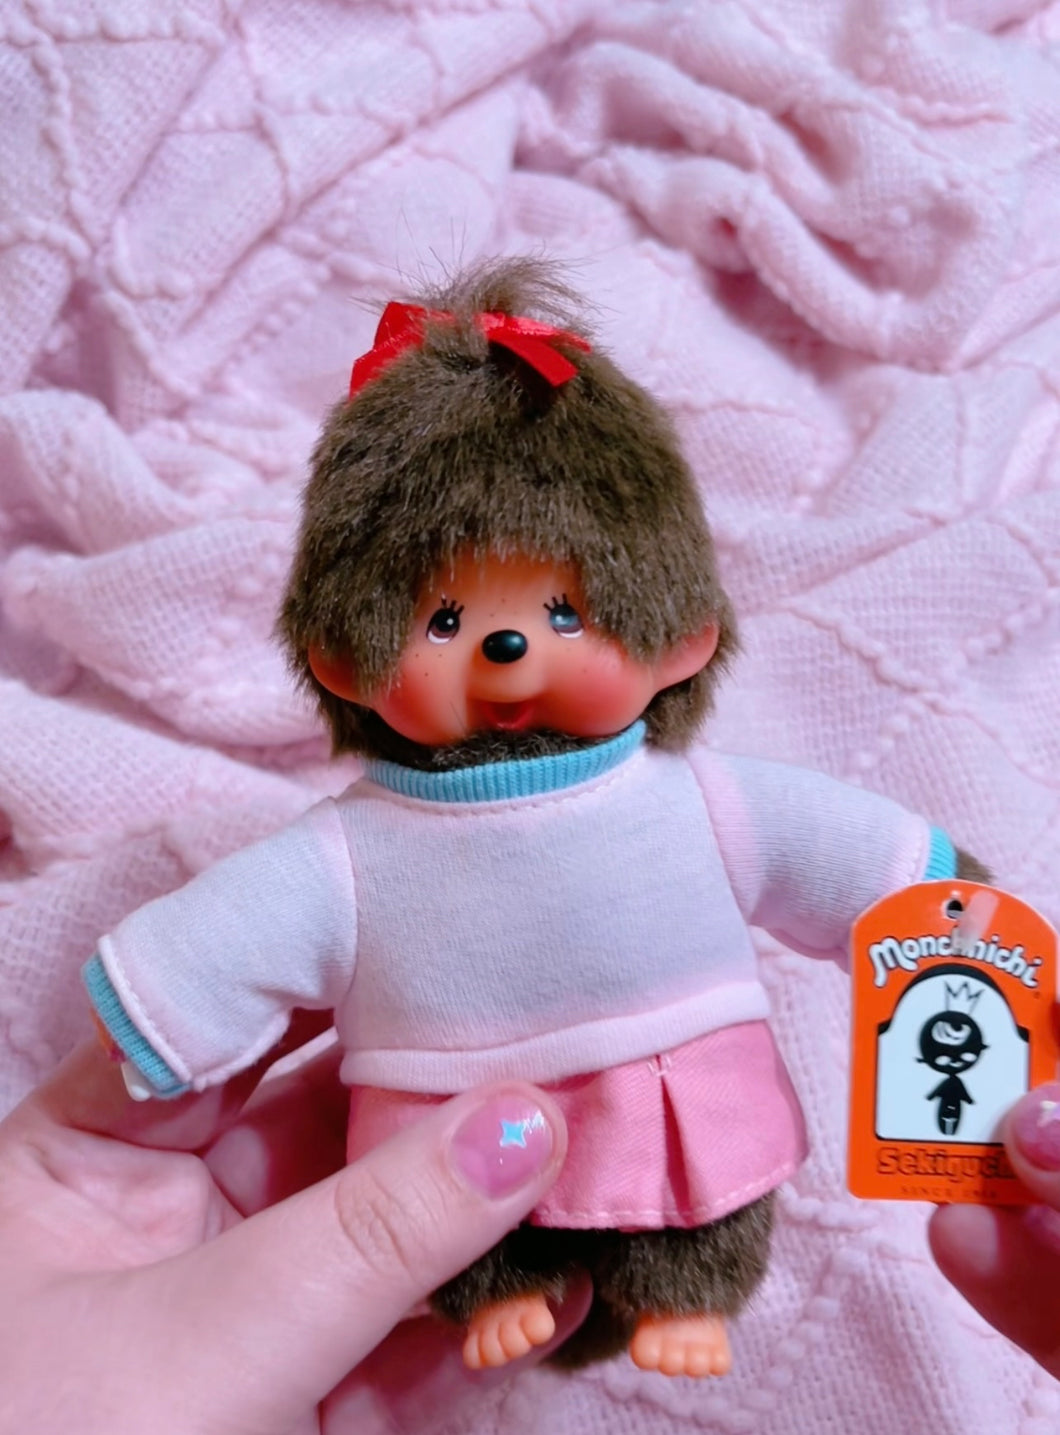 7” tall Monchhichi girl doll toy with cute outfit